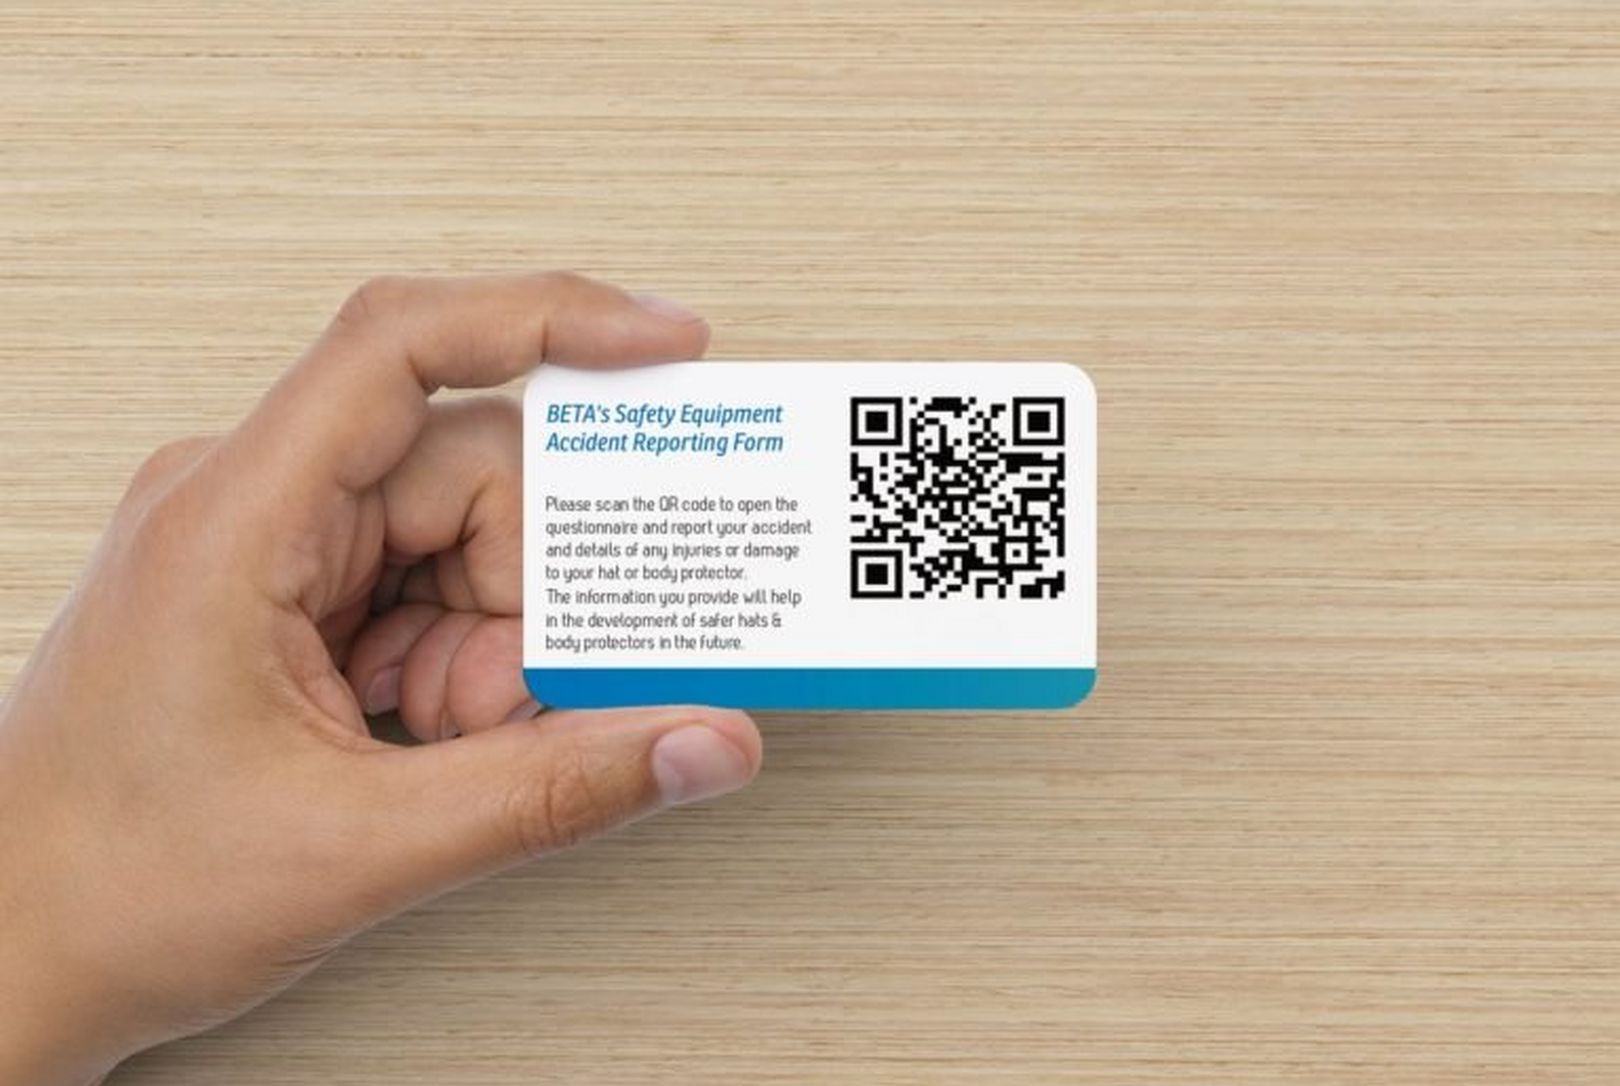 Riding Accident & Equipment Reporting – BETA - QR Code Card